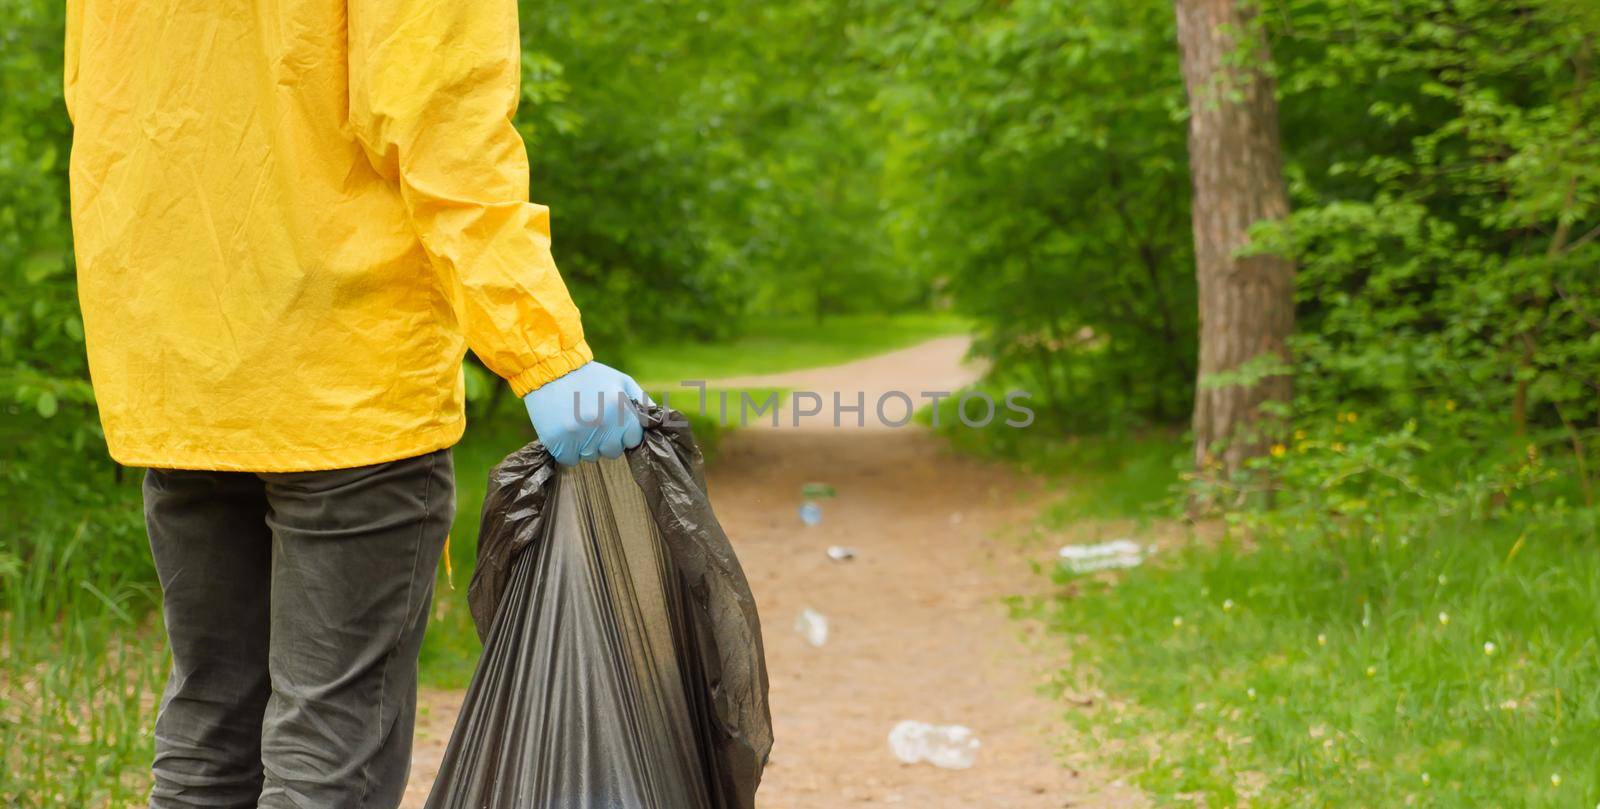 Banner volunteer hands picks up a plastic trash grass in park. Eco friendly. Volunteer cleaning up garbage a forest. People care earth pollution plastic garbage worker hand holding trash bag. Go green